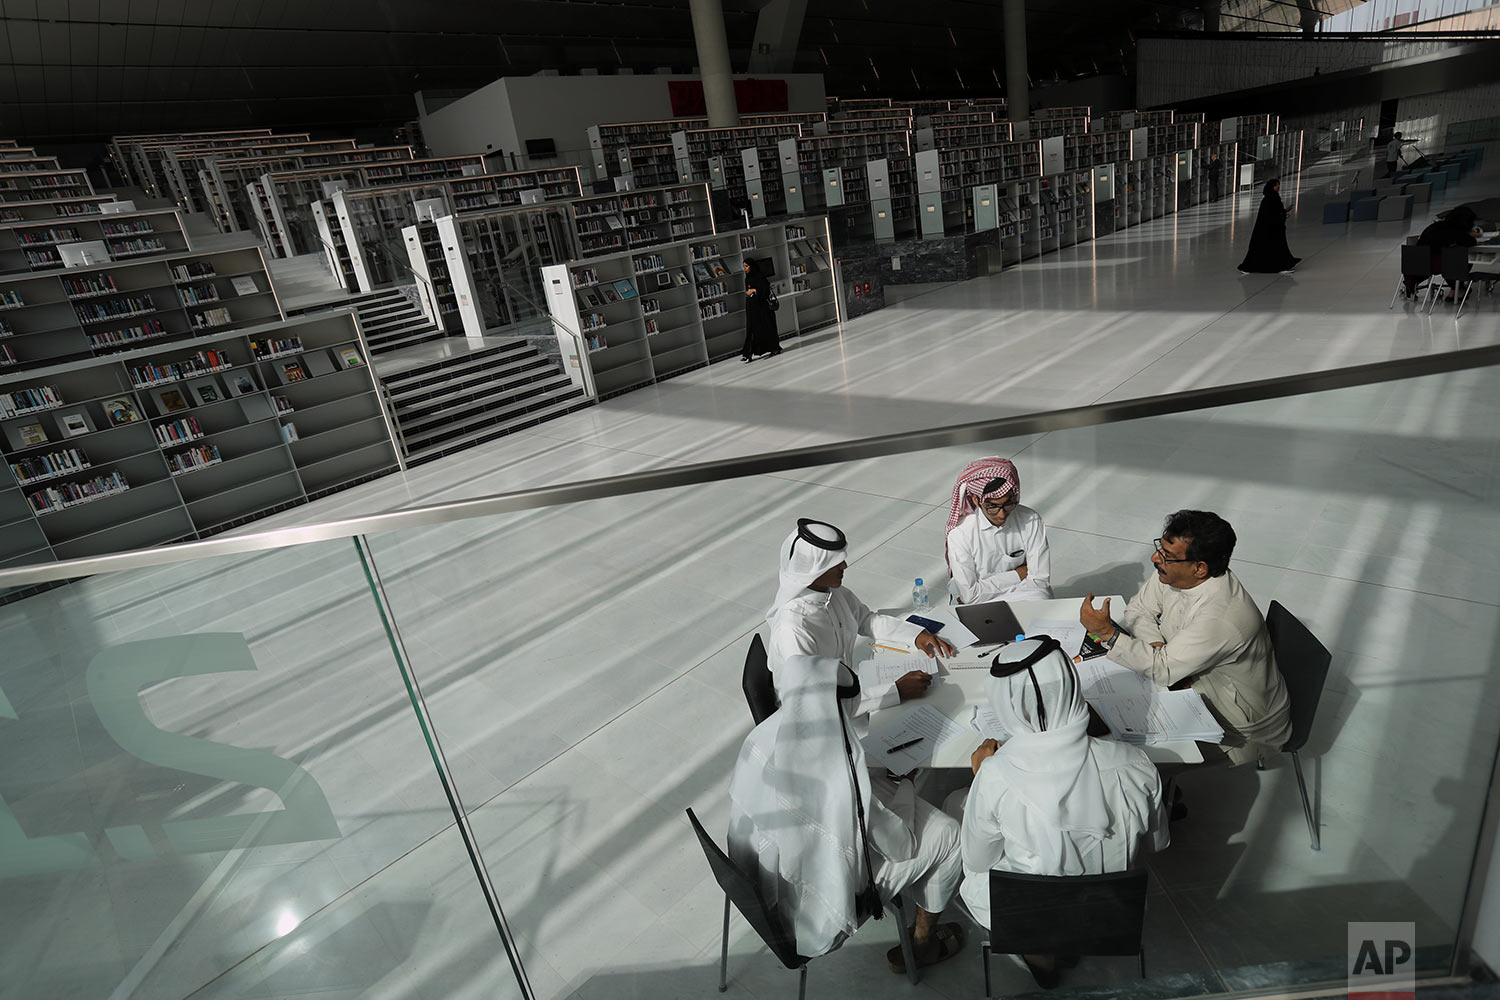  In this Tuesday, April 30, 2019 photo, a few students listen to their professor at the Qatar National Library in Doha, Qatar. (AP Photo/Kamran Jebreili) 